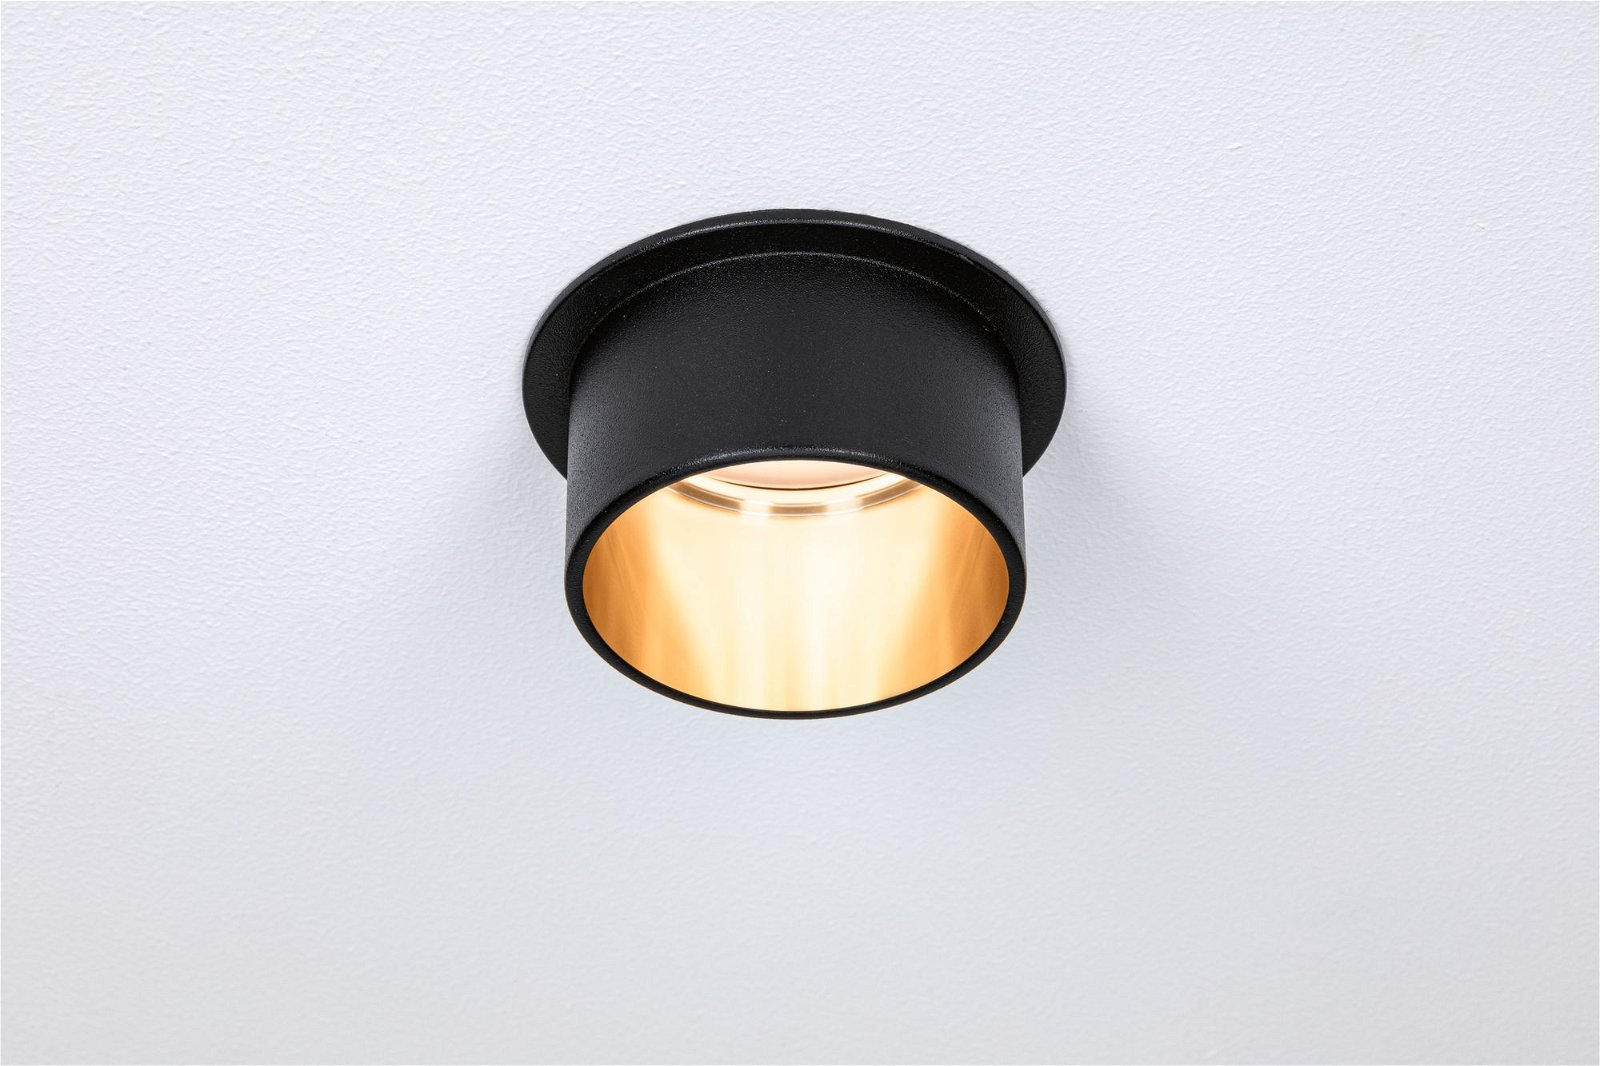 LED Recessed luminaire 3-Step-Dim Gil Coin Basic Set IP44 round 68mm Coin 3x6W 3x470lm 230V dimmable 2700K Black matt/Gold